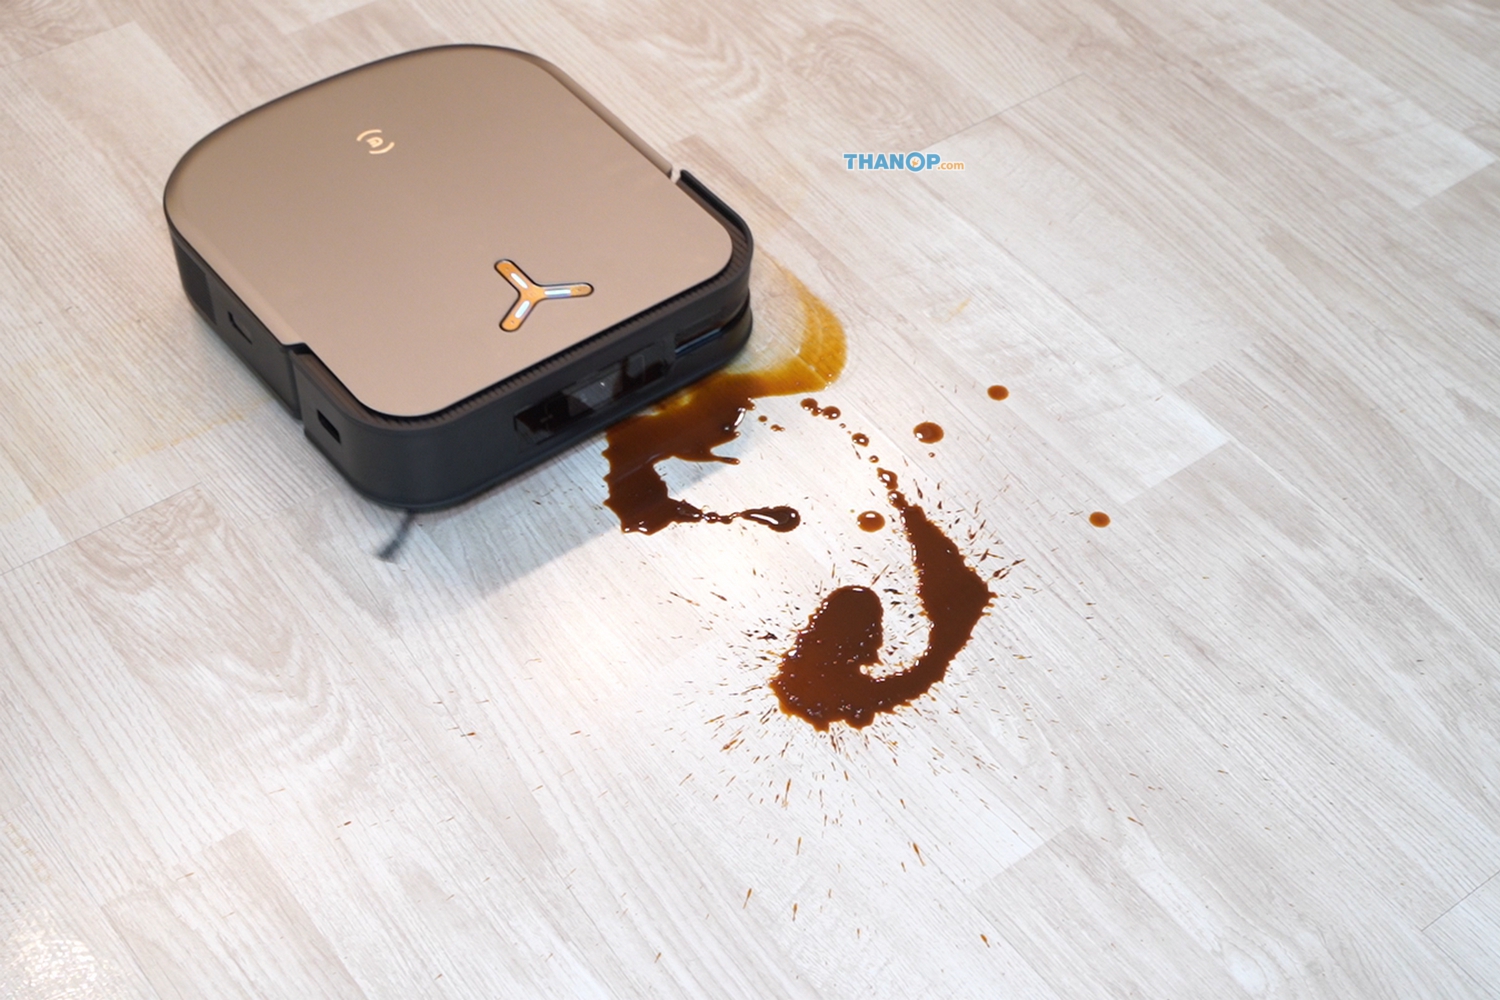 ecovacs-deebot-x2-omni-feature-ozmo-turbo20-mopping-system